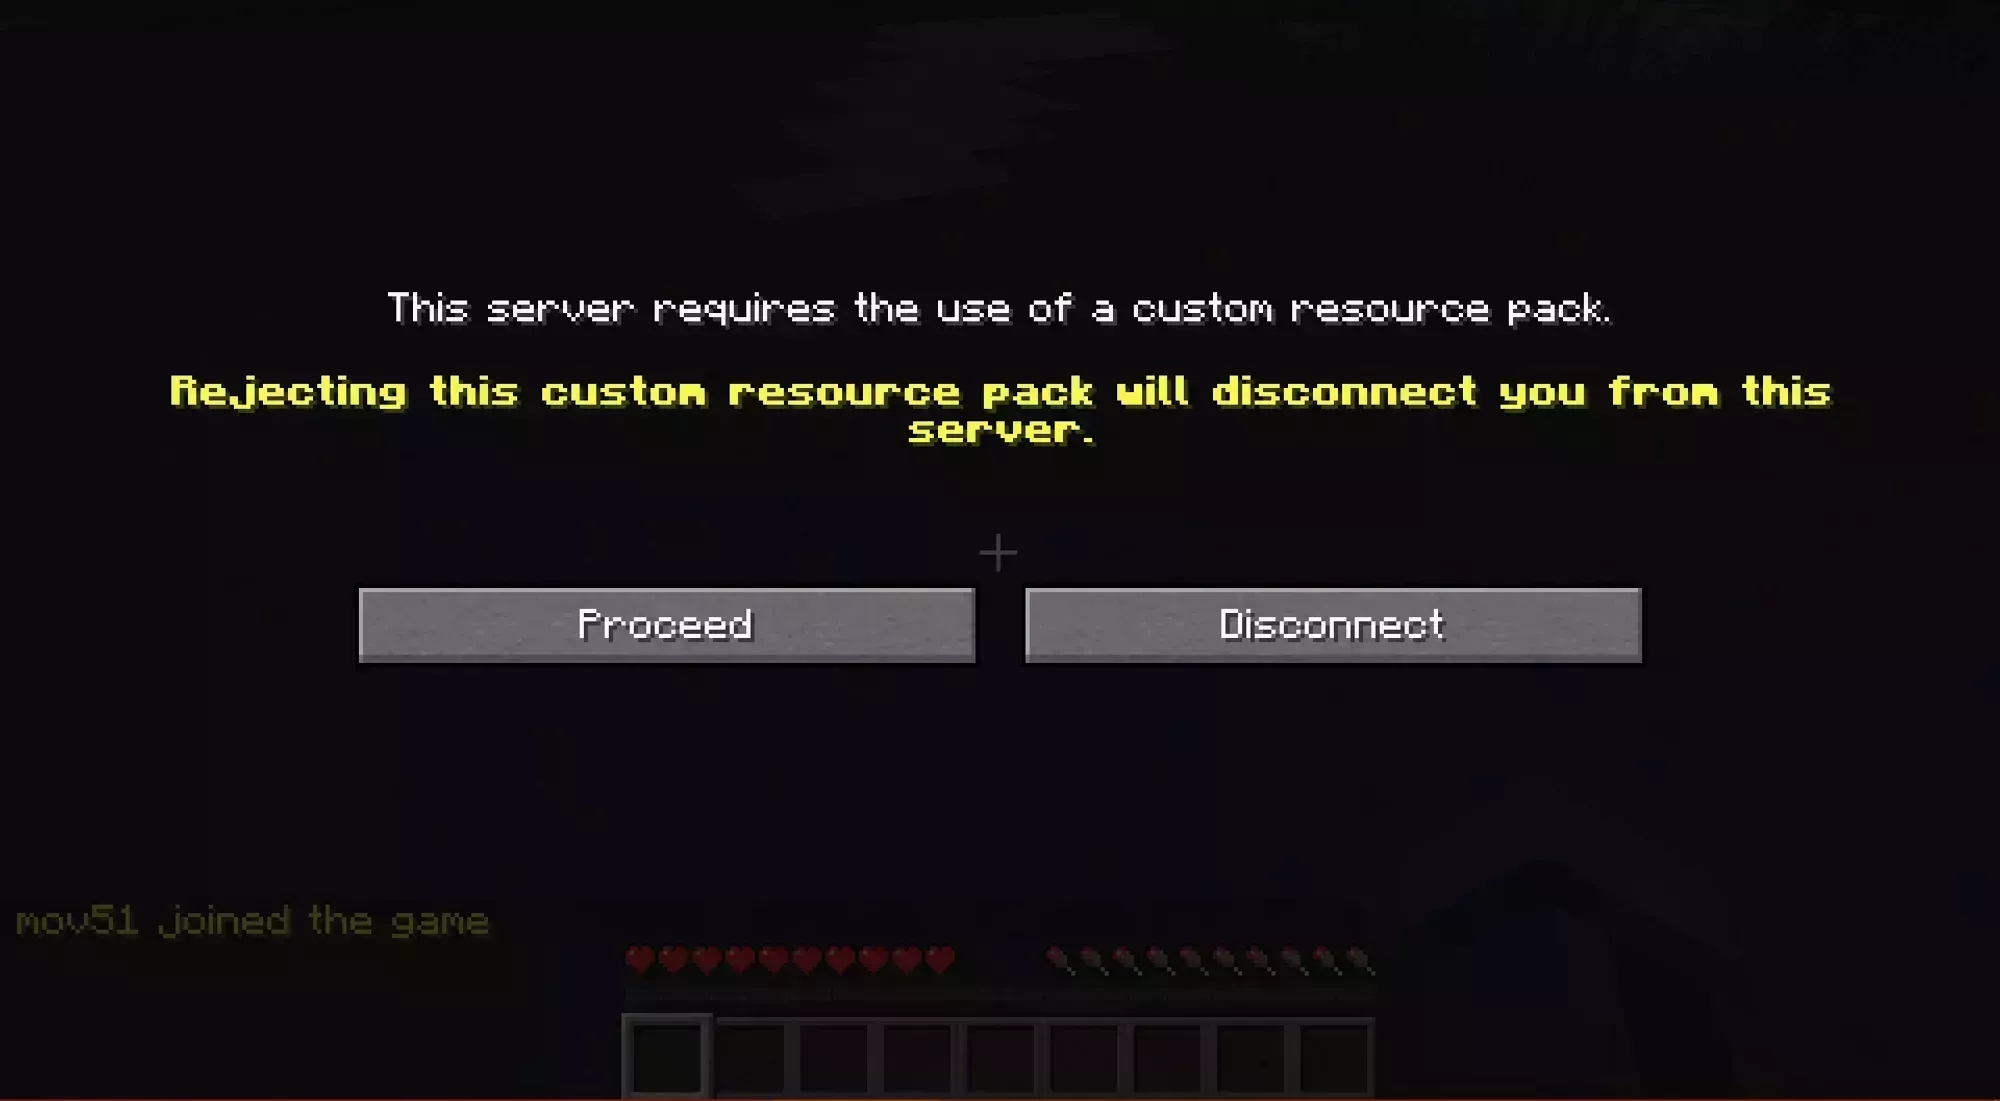 The resource pack required screen shown when a player joins the server